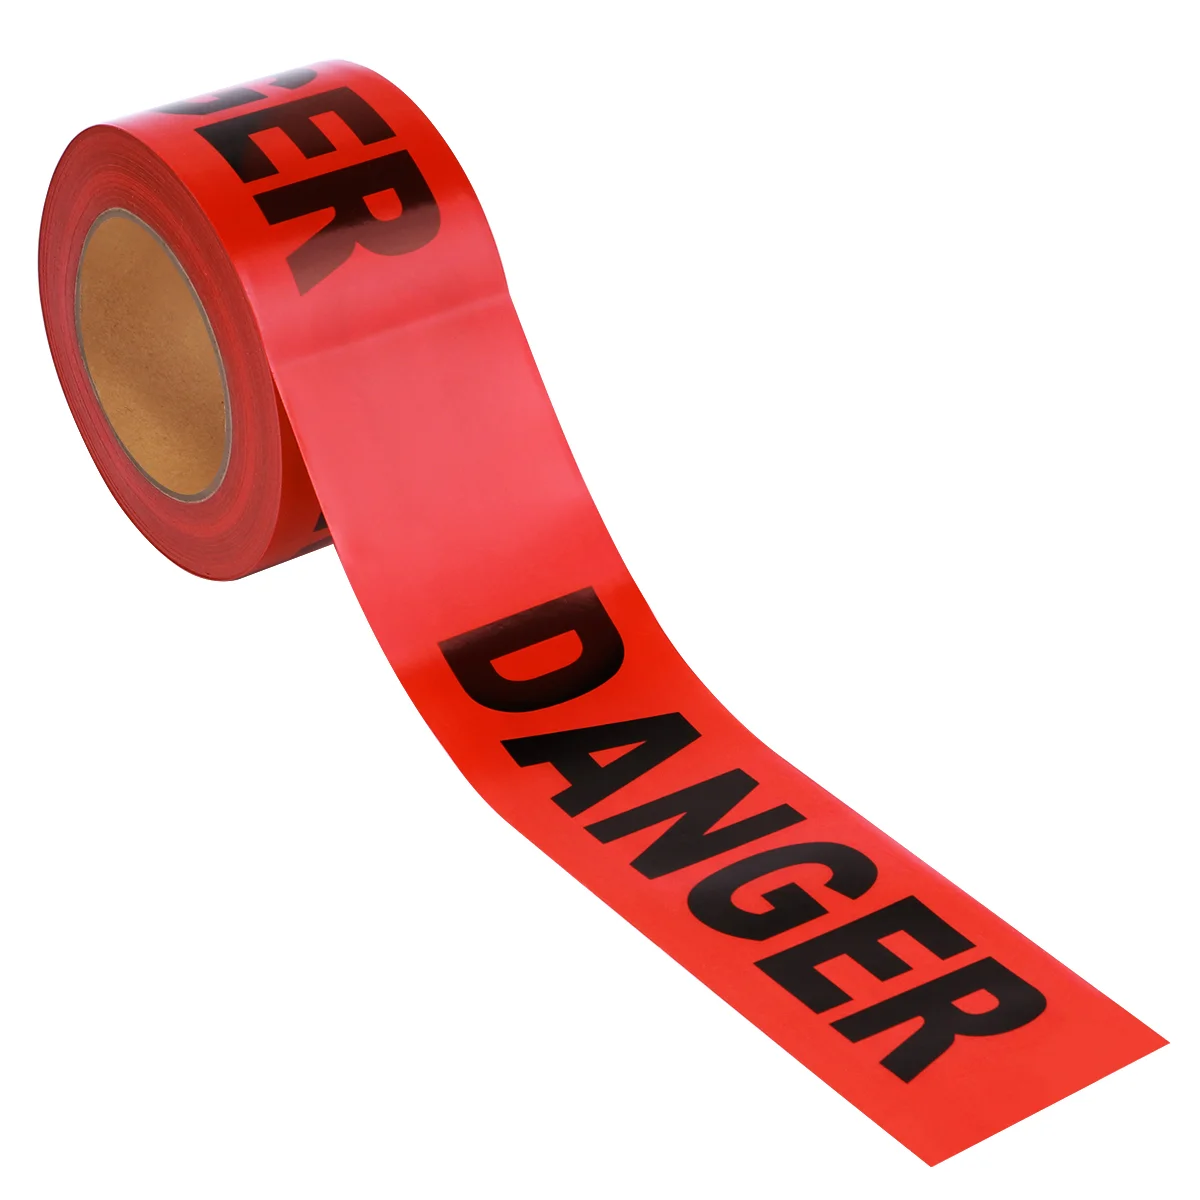 UEETEK 1PC Danger Tape 100M Practical Warning Tape Hazard Tape Portable Roll Caution Tape for Safety Public Works